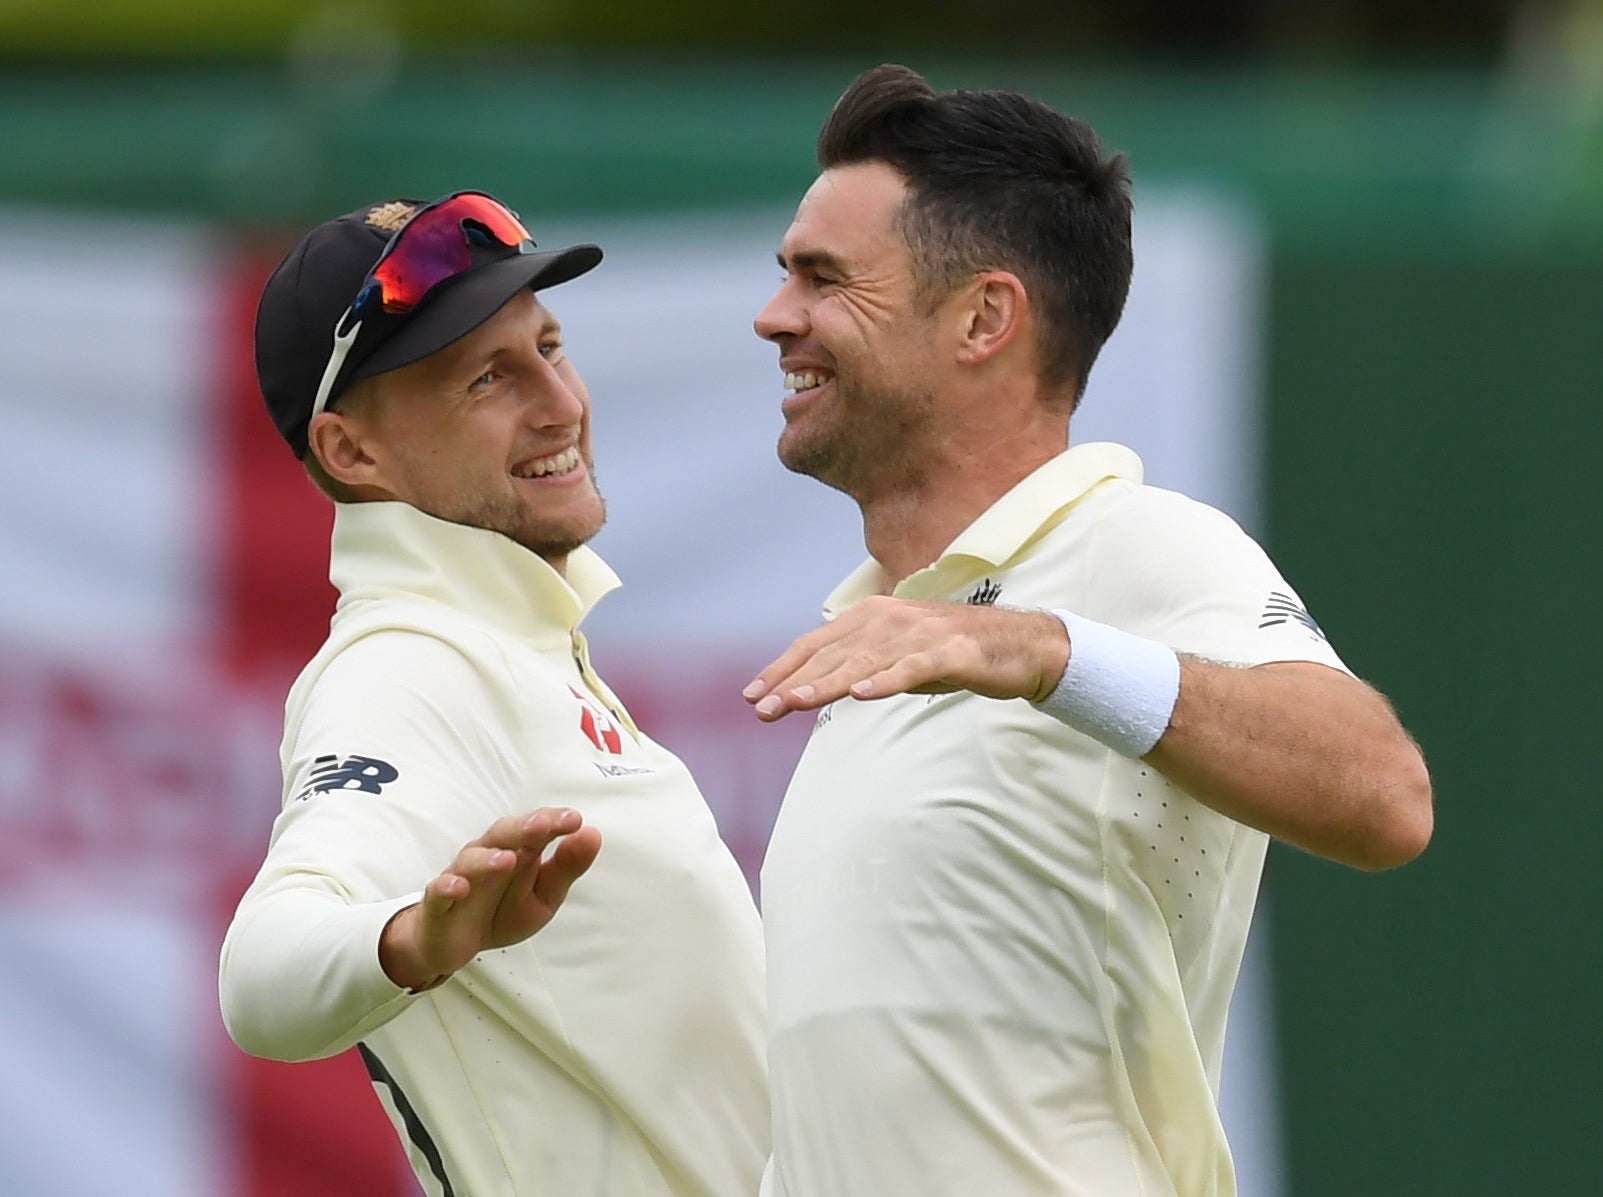 James Anderson, 37, claimed his 28th five-wicket haul in Tests